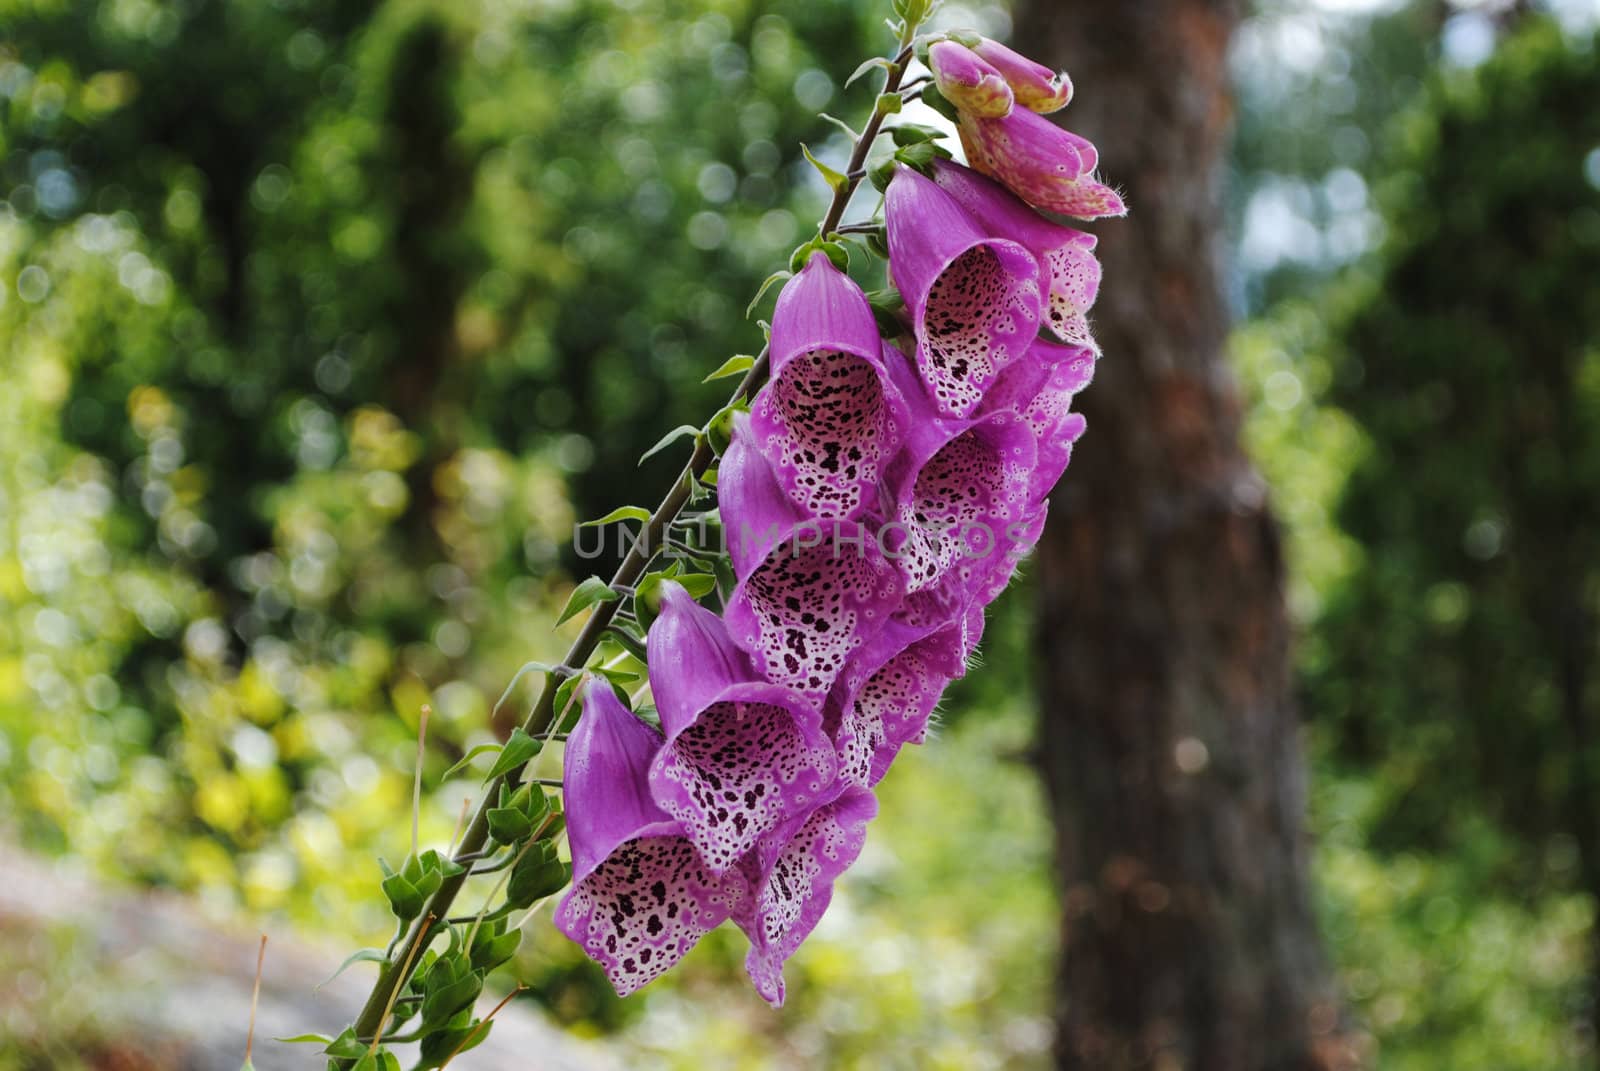 Digitalis purpurea (Common Foxglove, Purple Foxglove or Lady's Glove), is a flowering plant in the family Plantaginaceae (formerly treated in the family Scrophulariaceae), native to most of Europe.